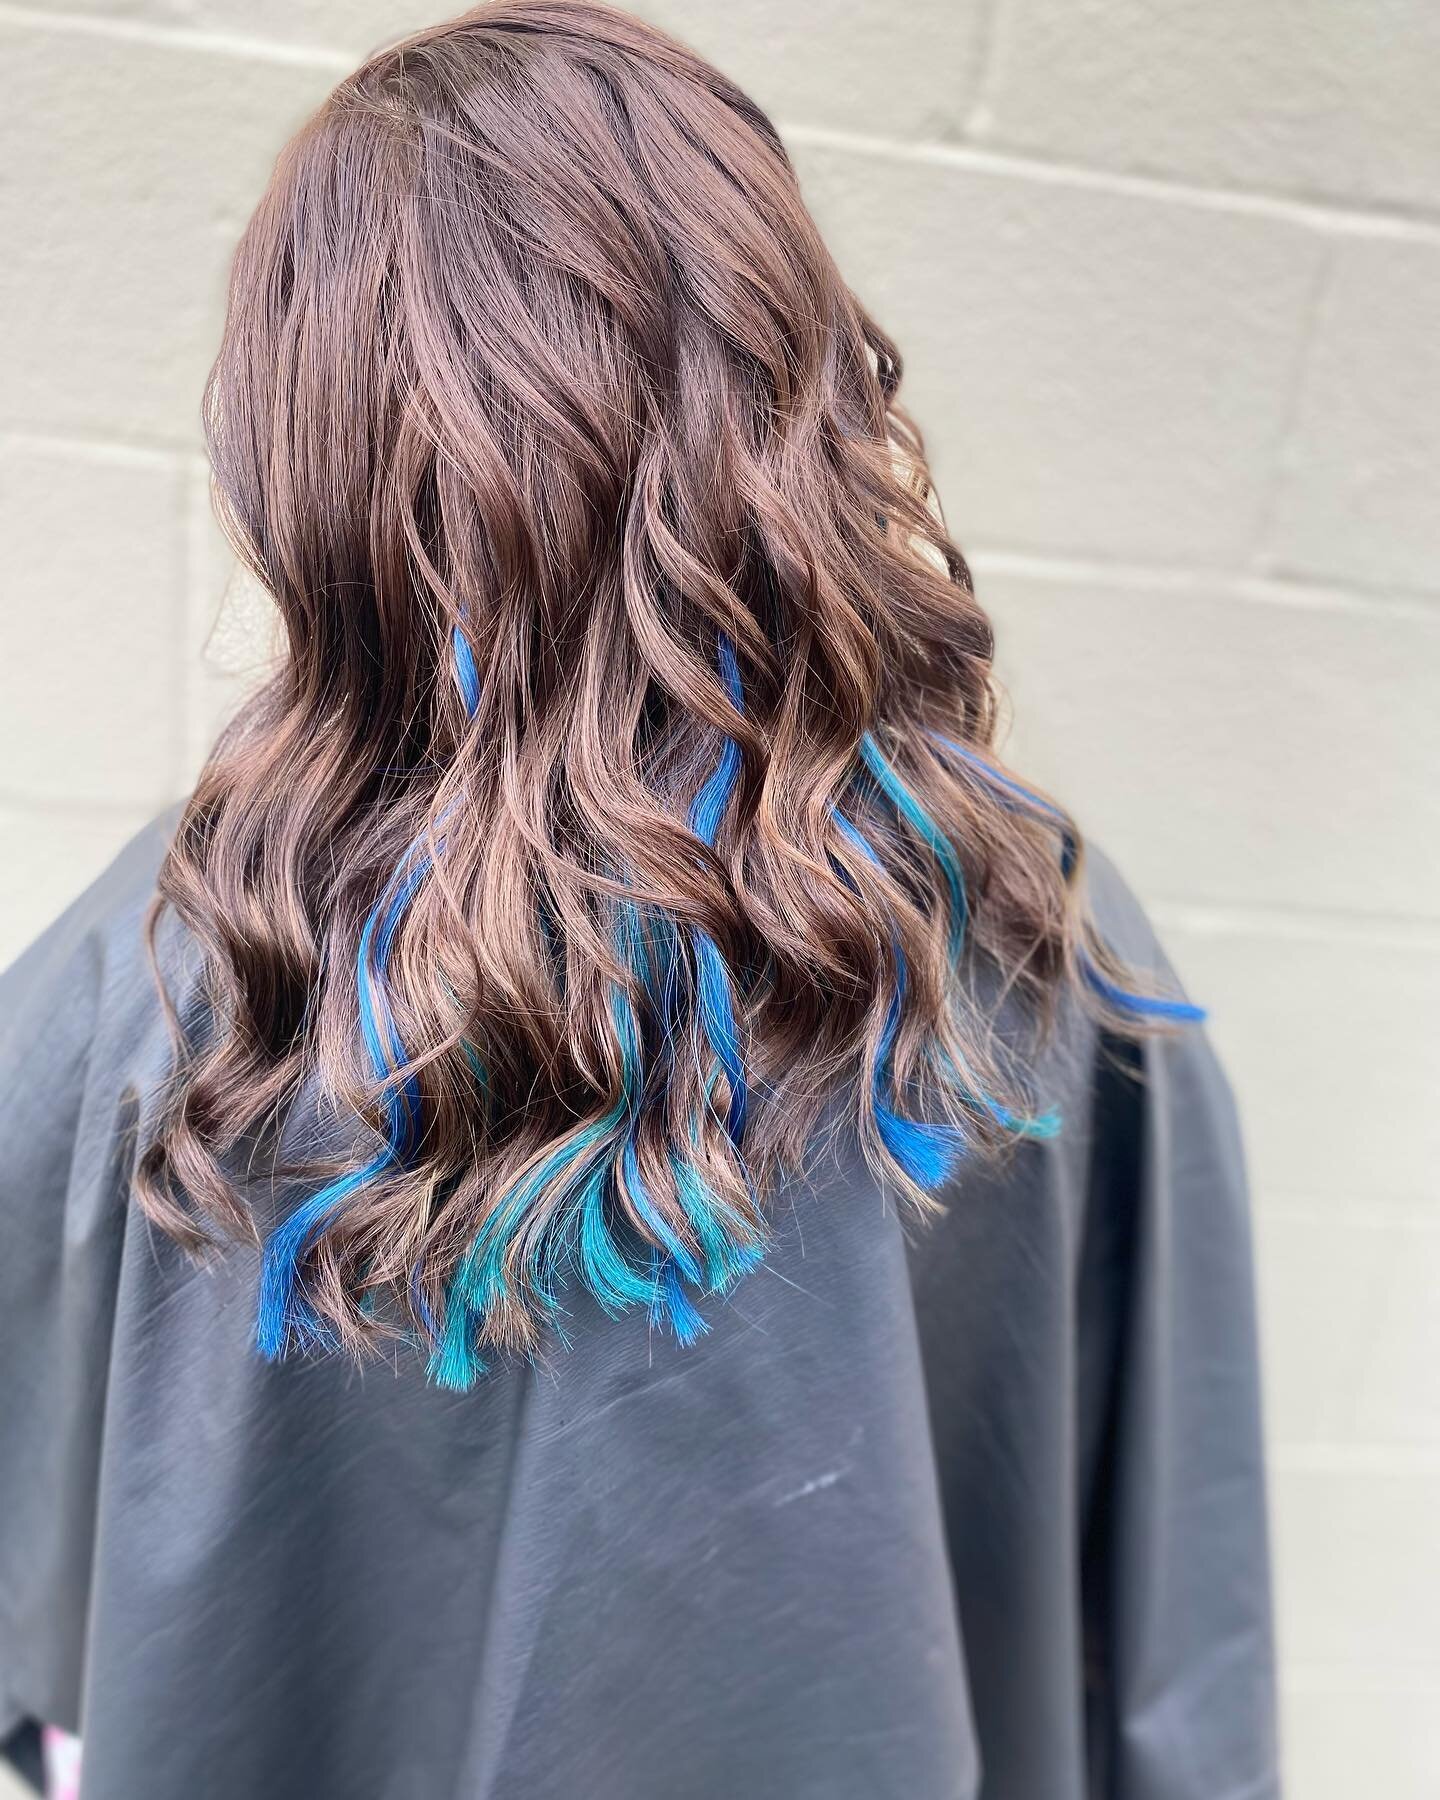 Are you looking to add some fun colors to your hair but don&rsquo;t want to color it👀

Consider extensions! We did a mixture of 2 different blues so she has some pops of color and can remove them whenever she wants❣️